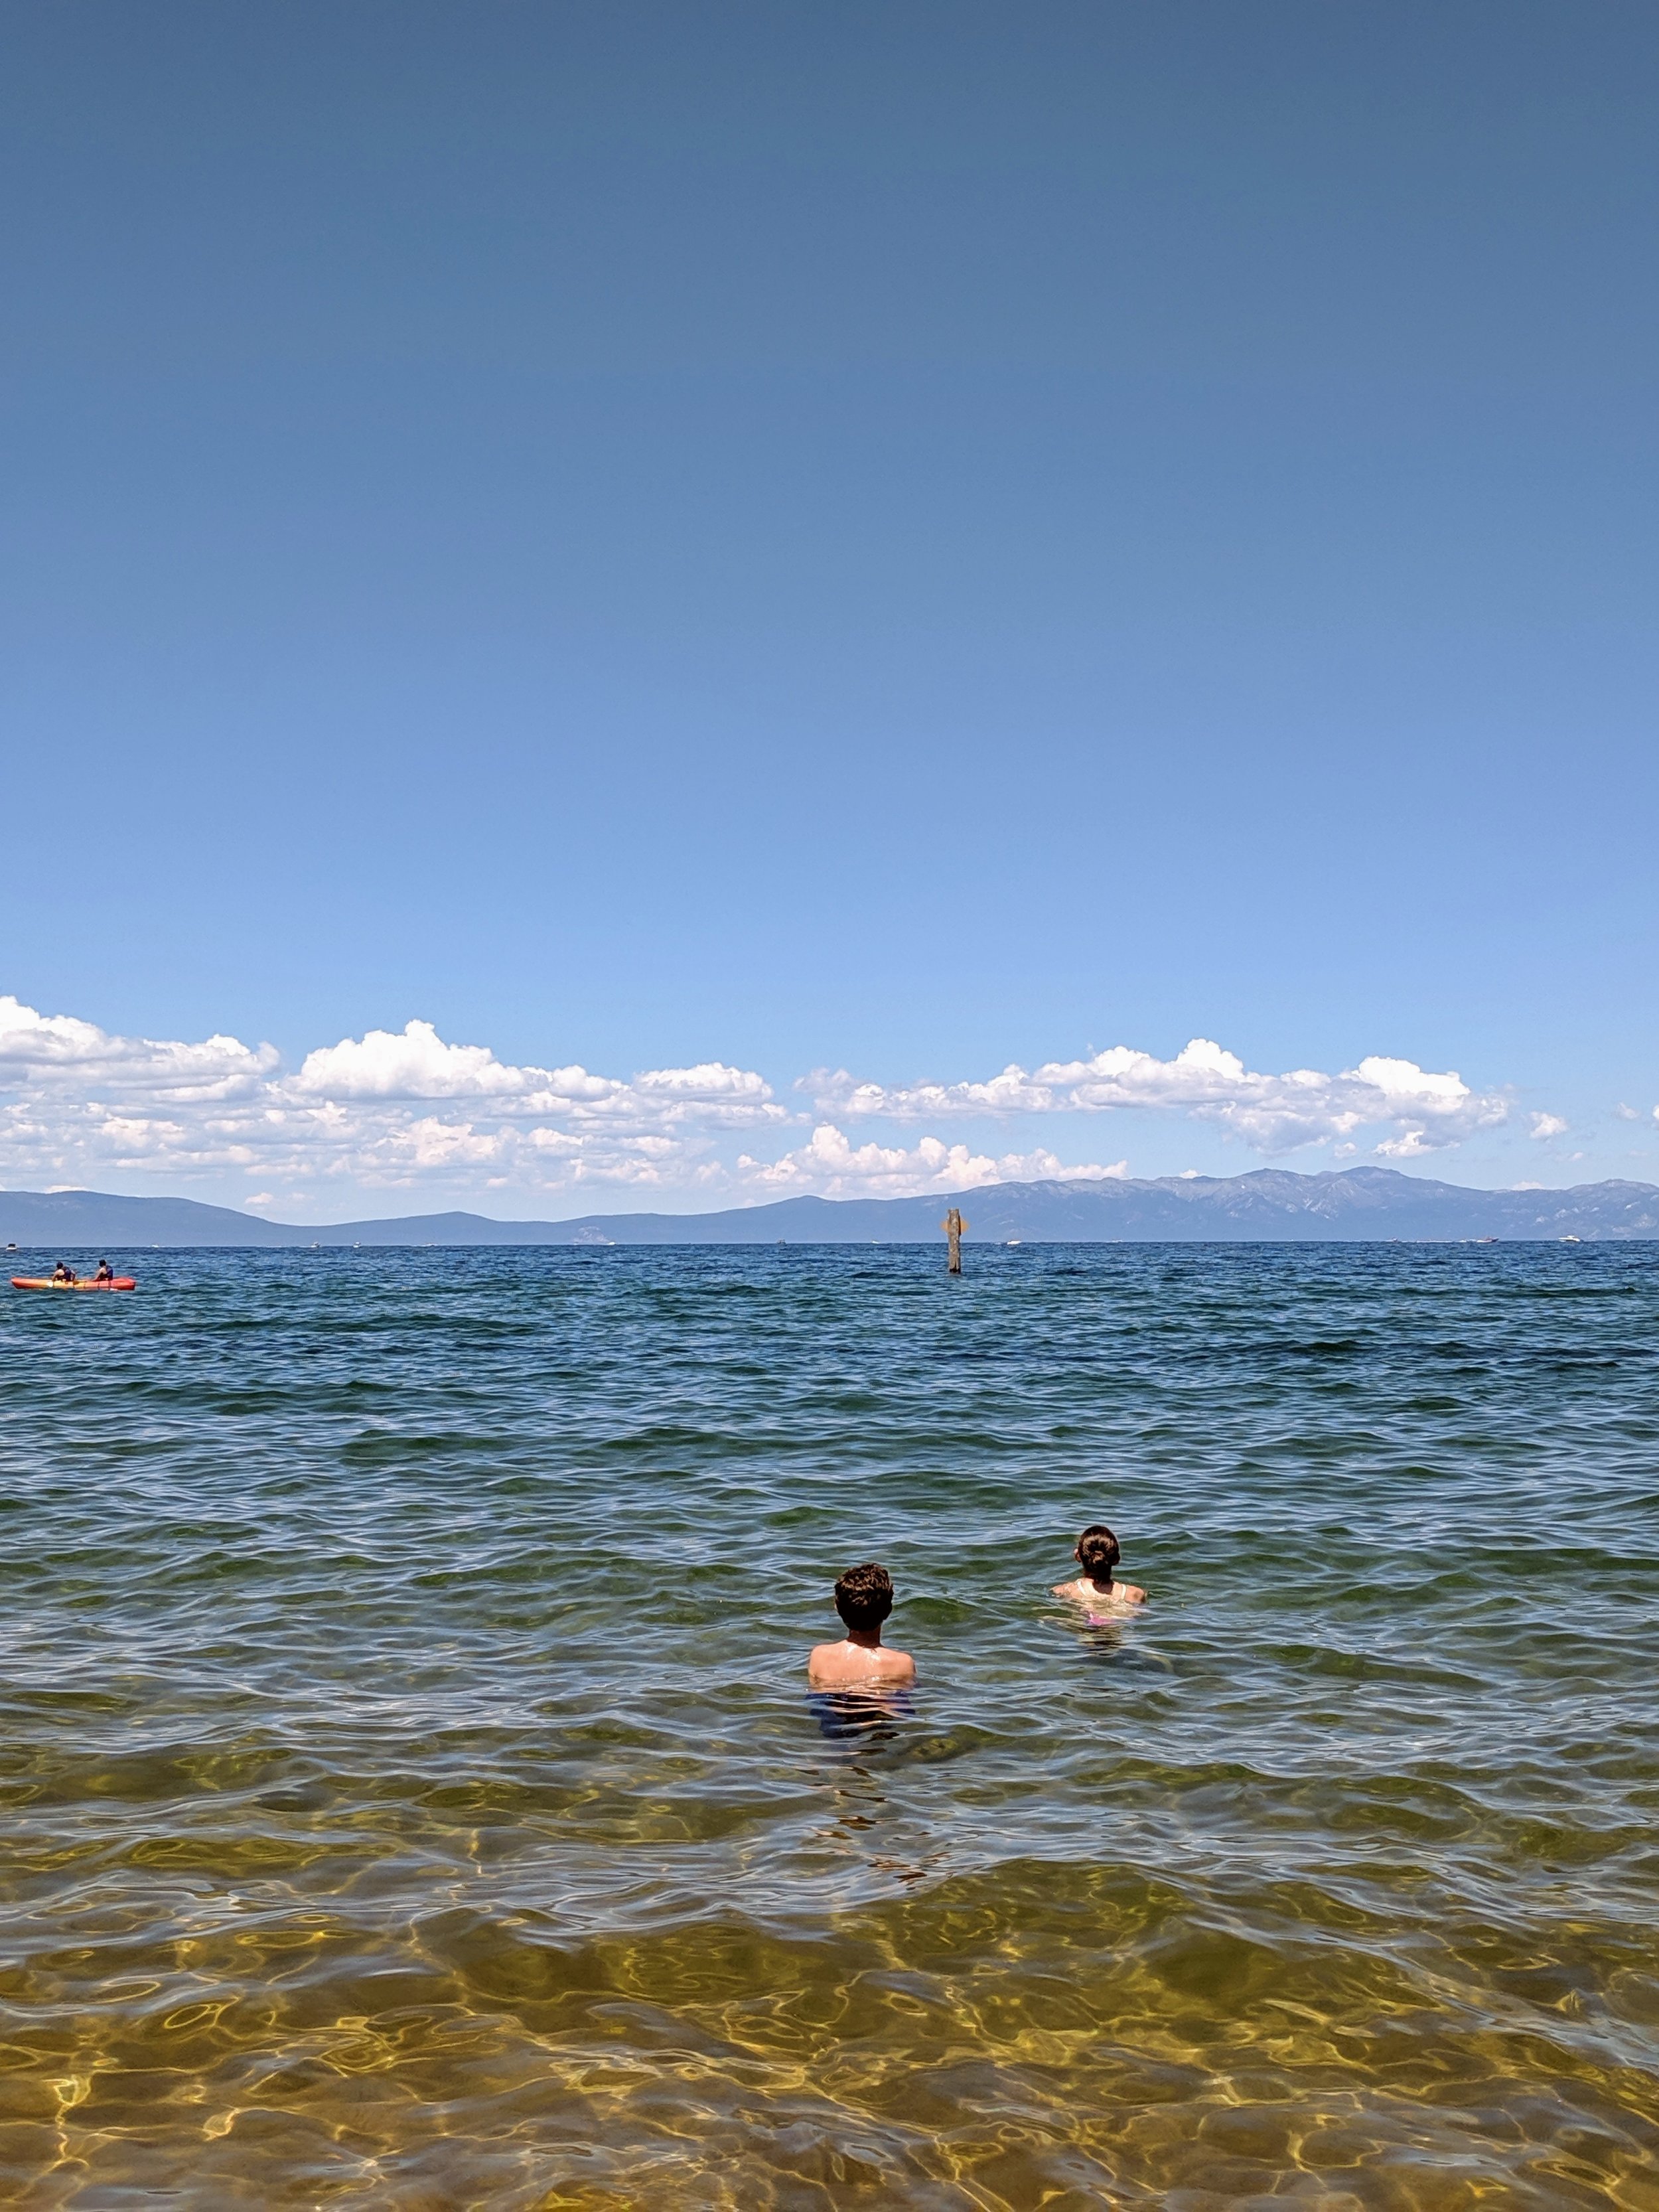  Ada and Jackson at Pope Beach in Lake Tahoe. 